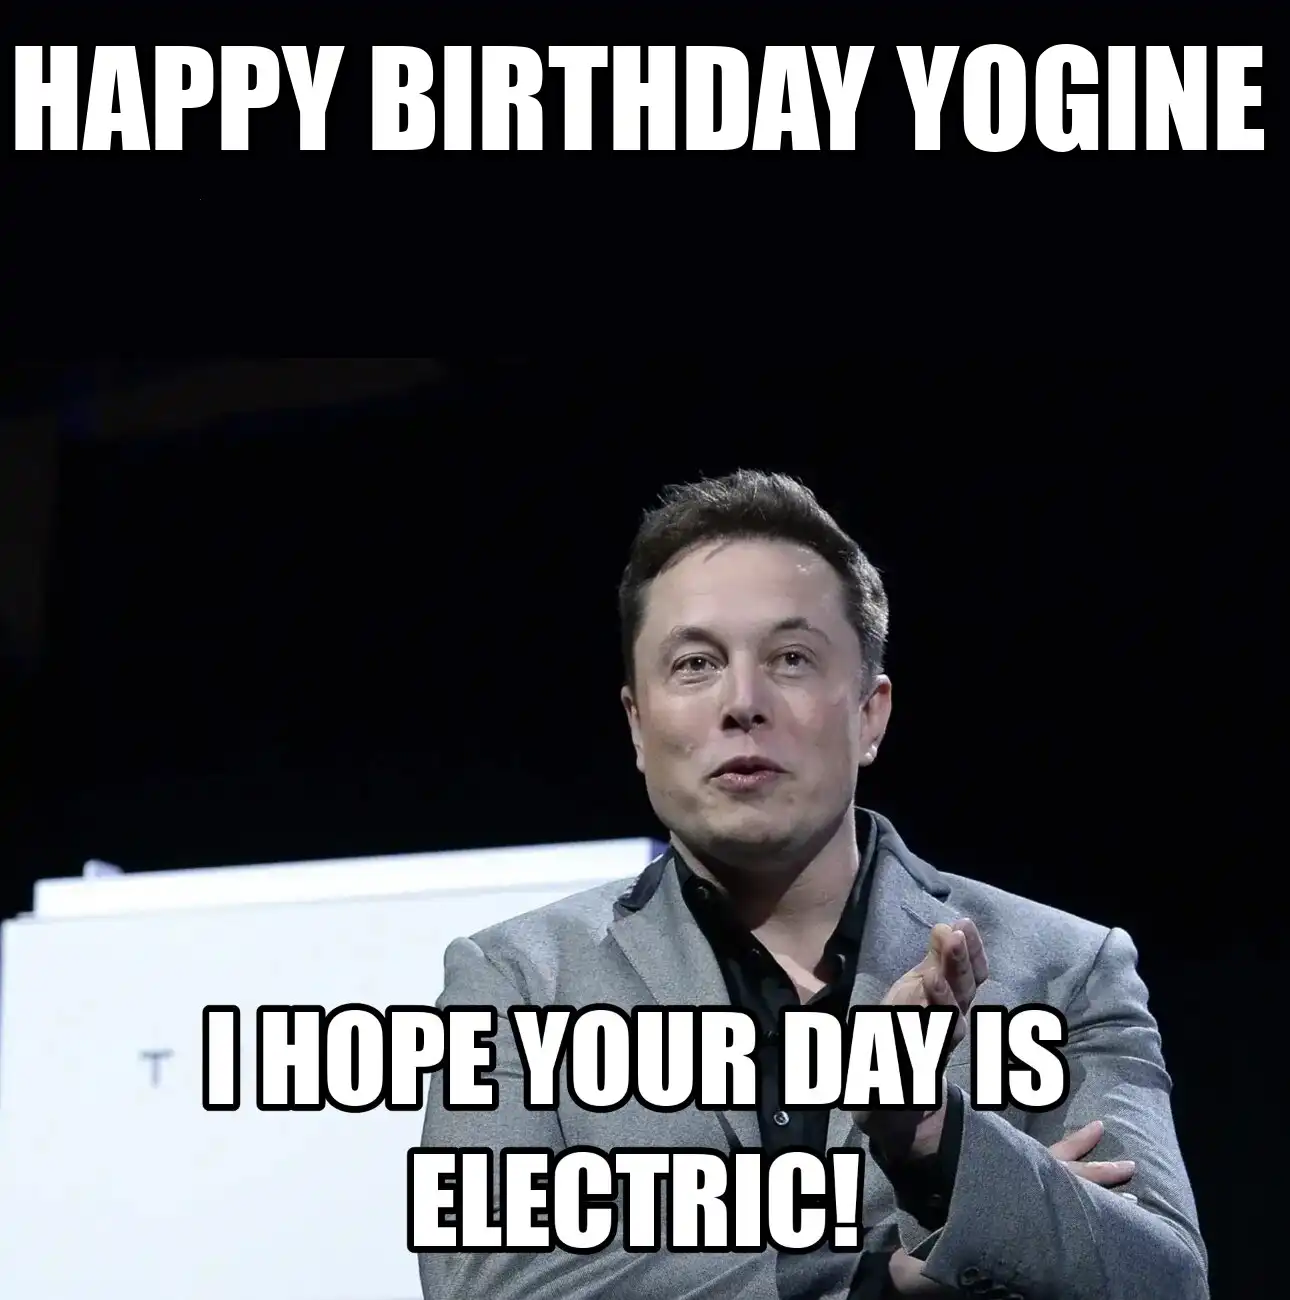 Happy Birthday Yogine I Hope Your Day Is Electric Meme